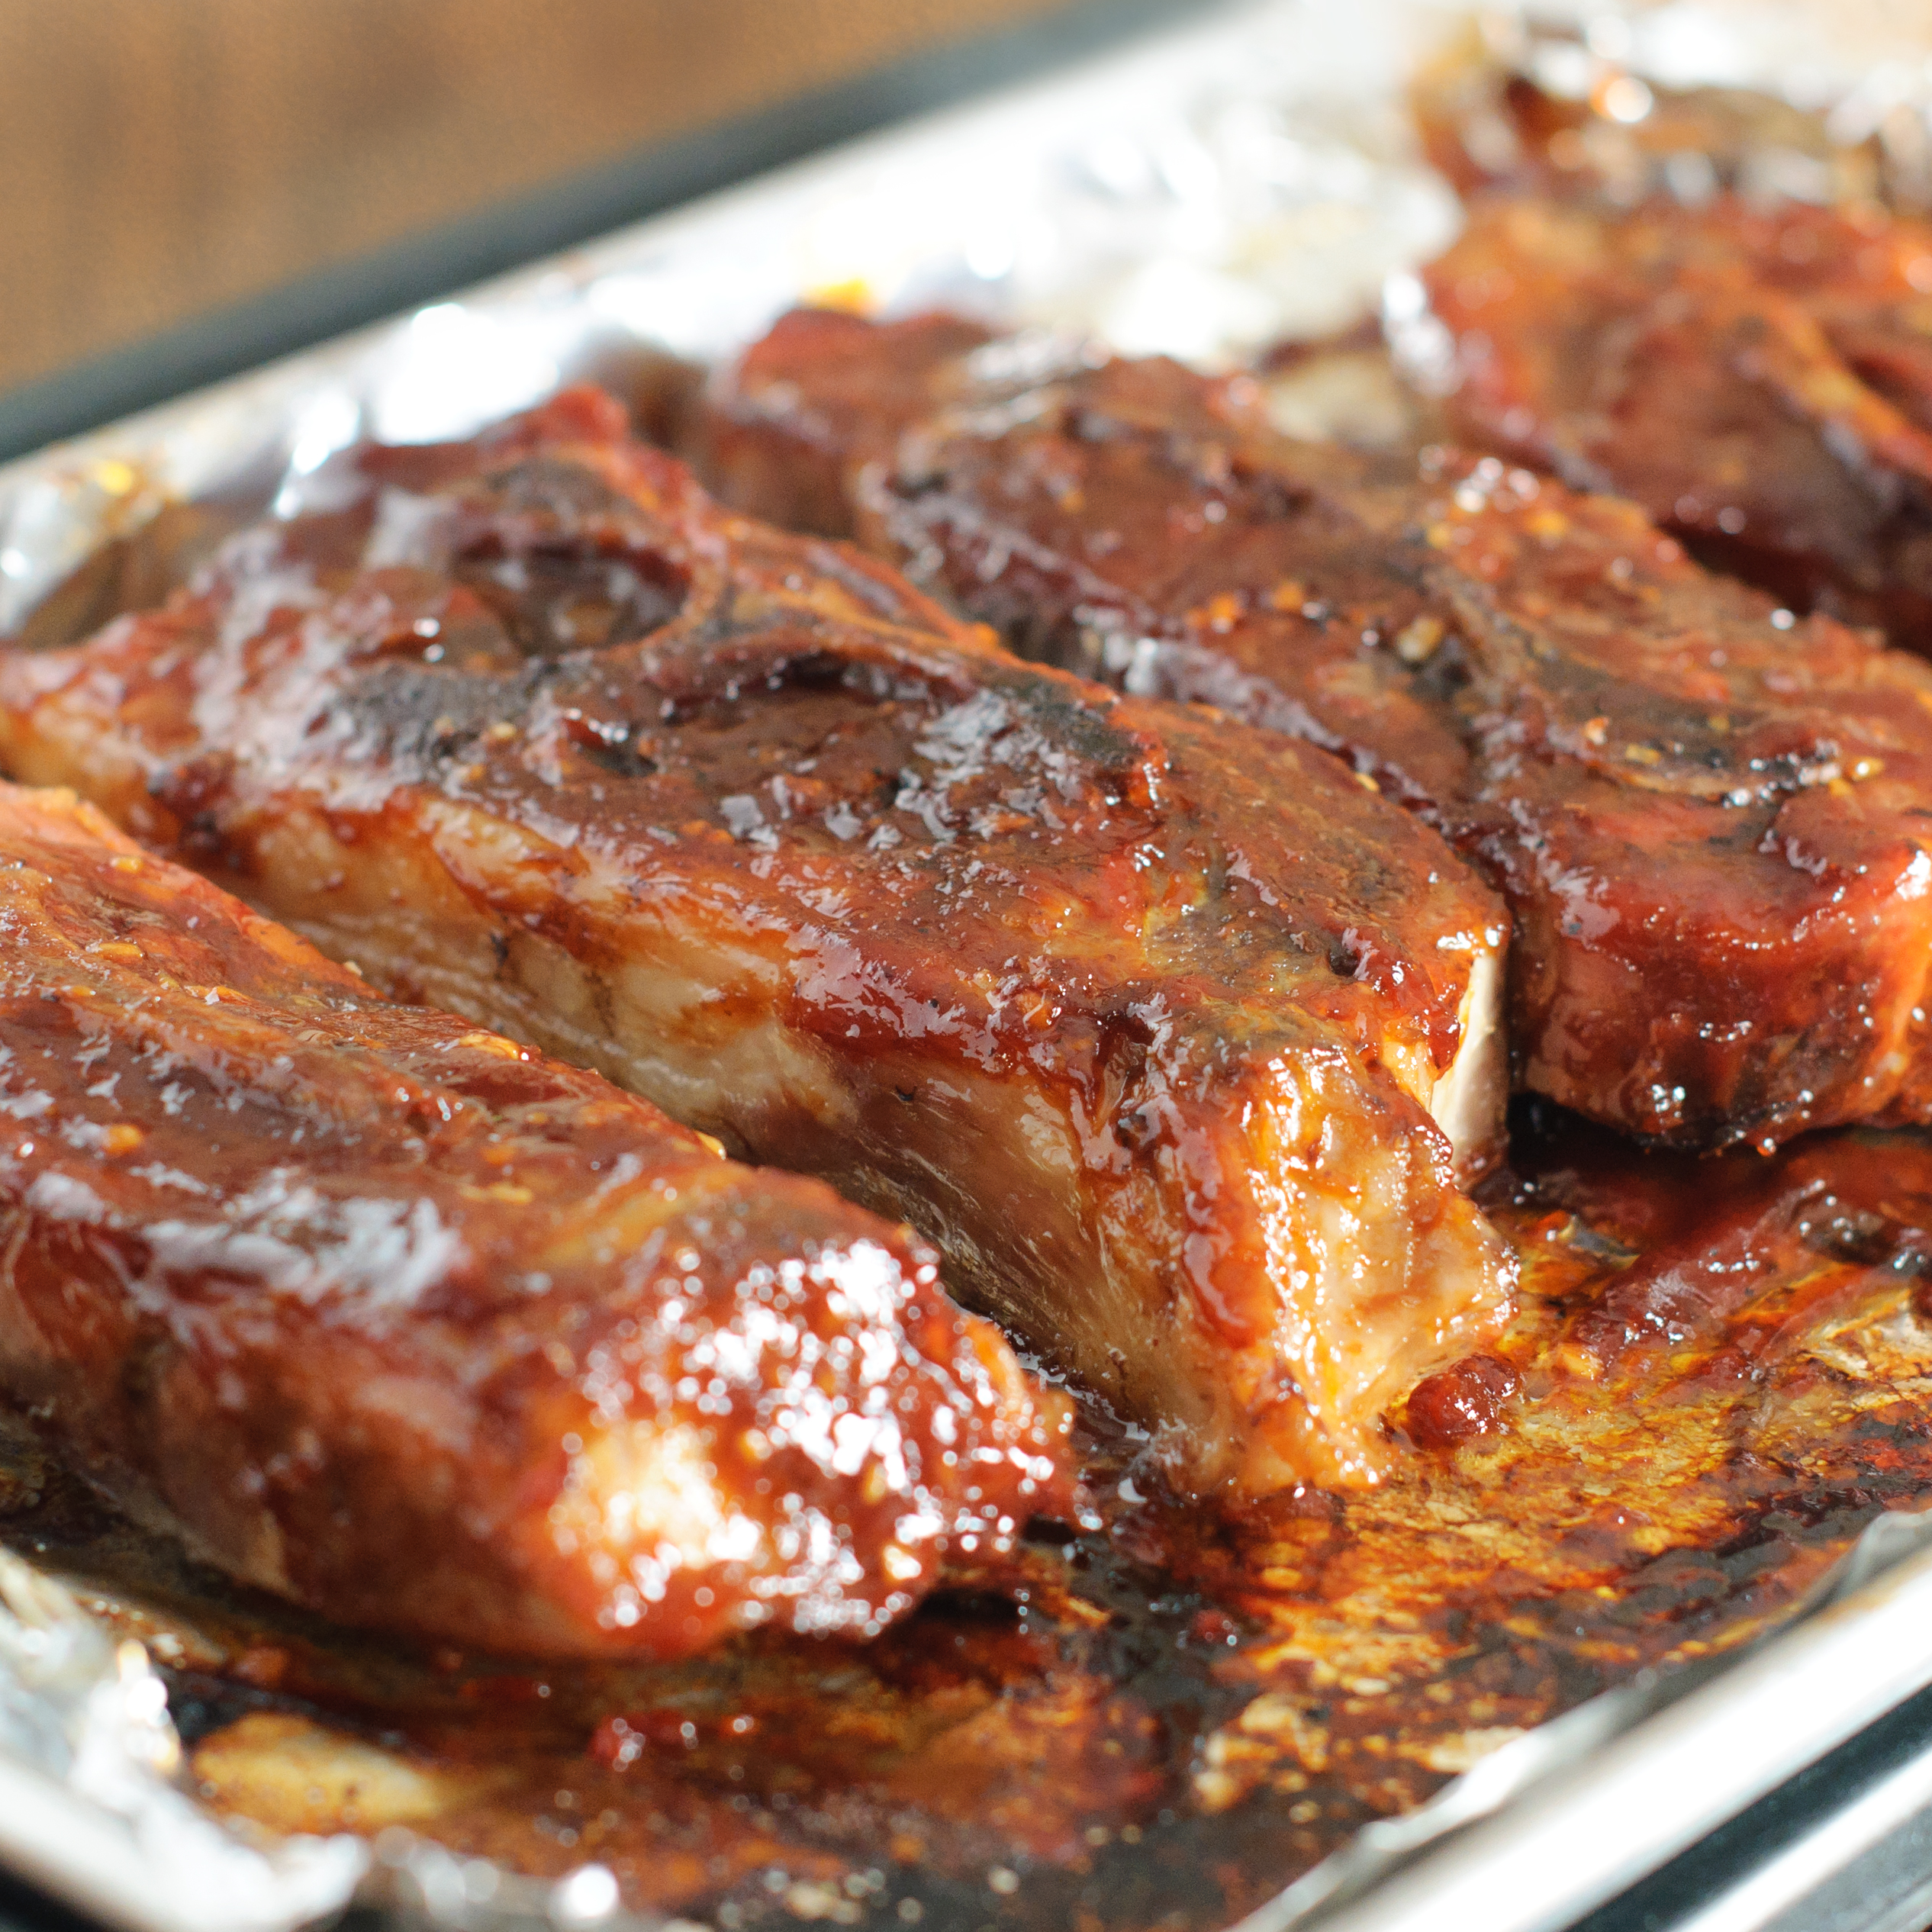 Bbq Country Style Ribs Recipe Allrecipes,Glass Noodles Calories